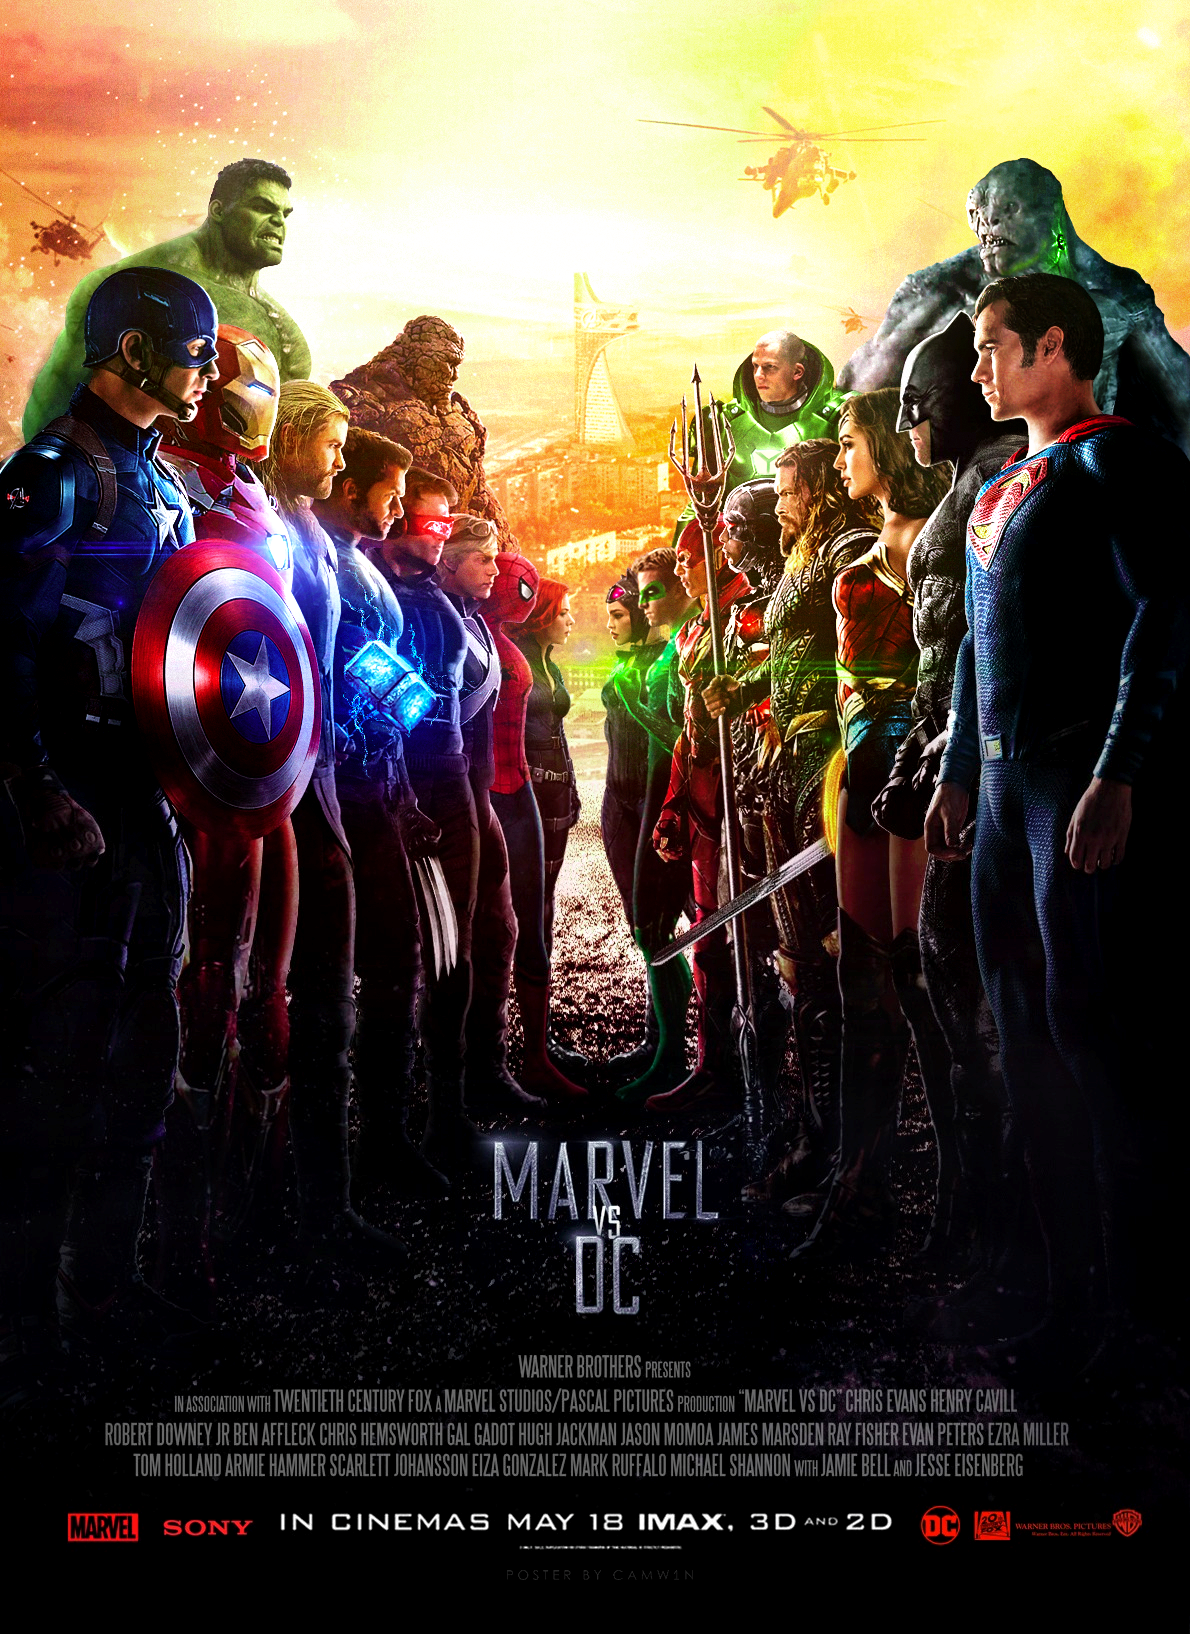 Marvel Vs DC Theatrical Poster by CAMW1N on DeviantArt